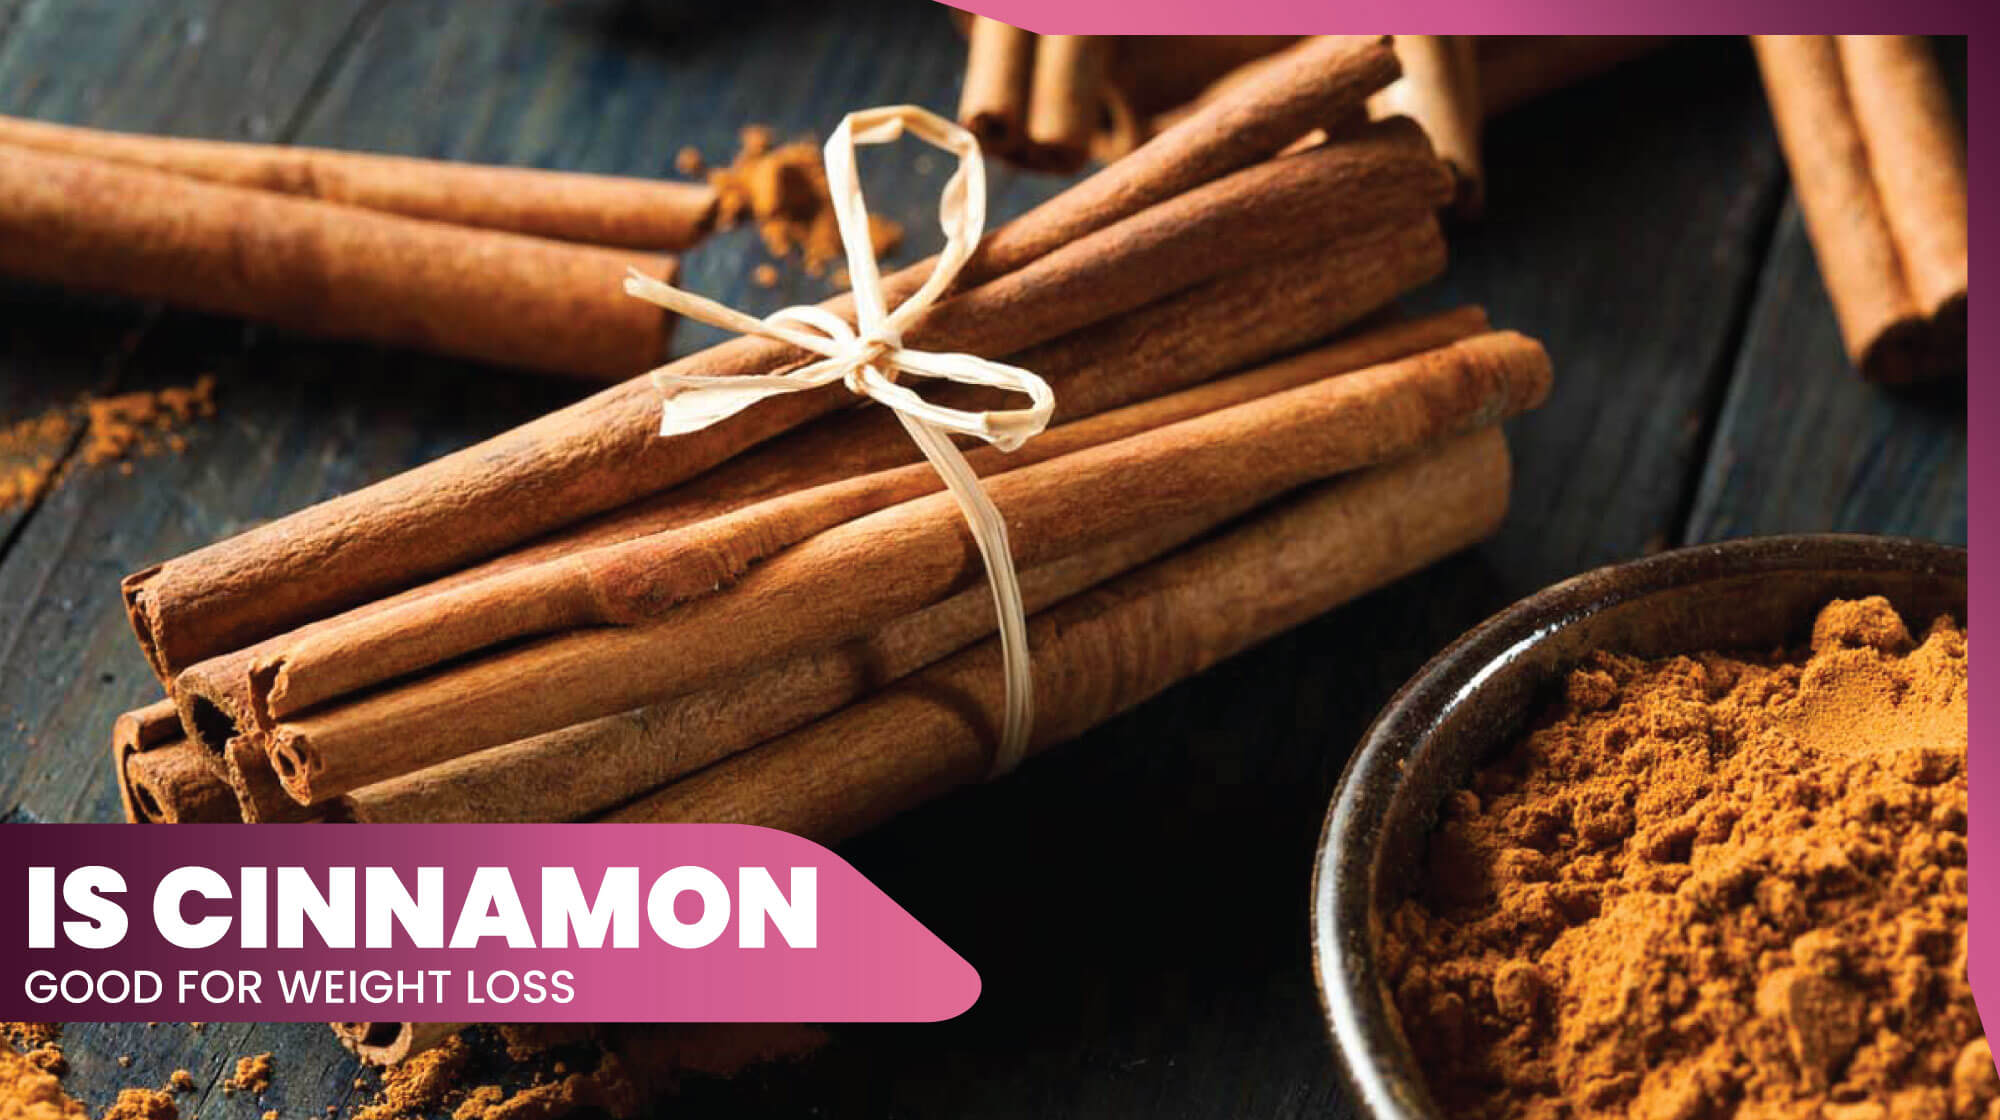 11is cinnamon good for weight loss